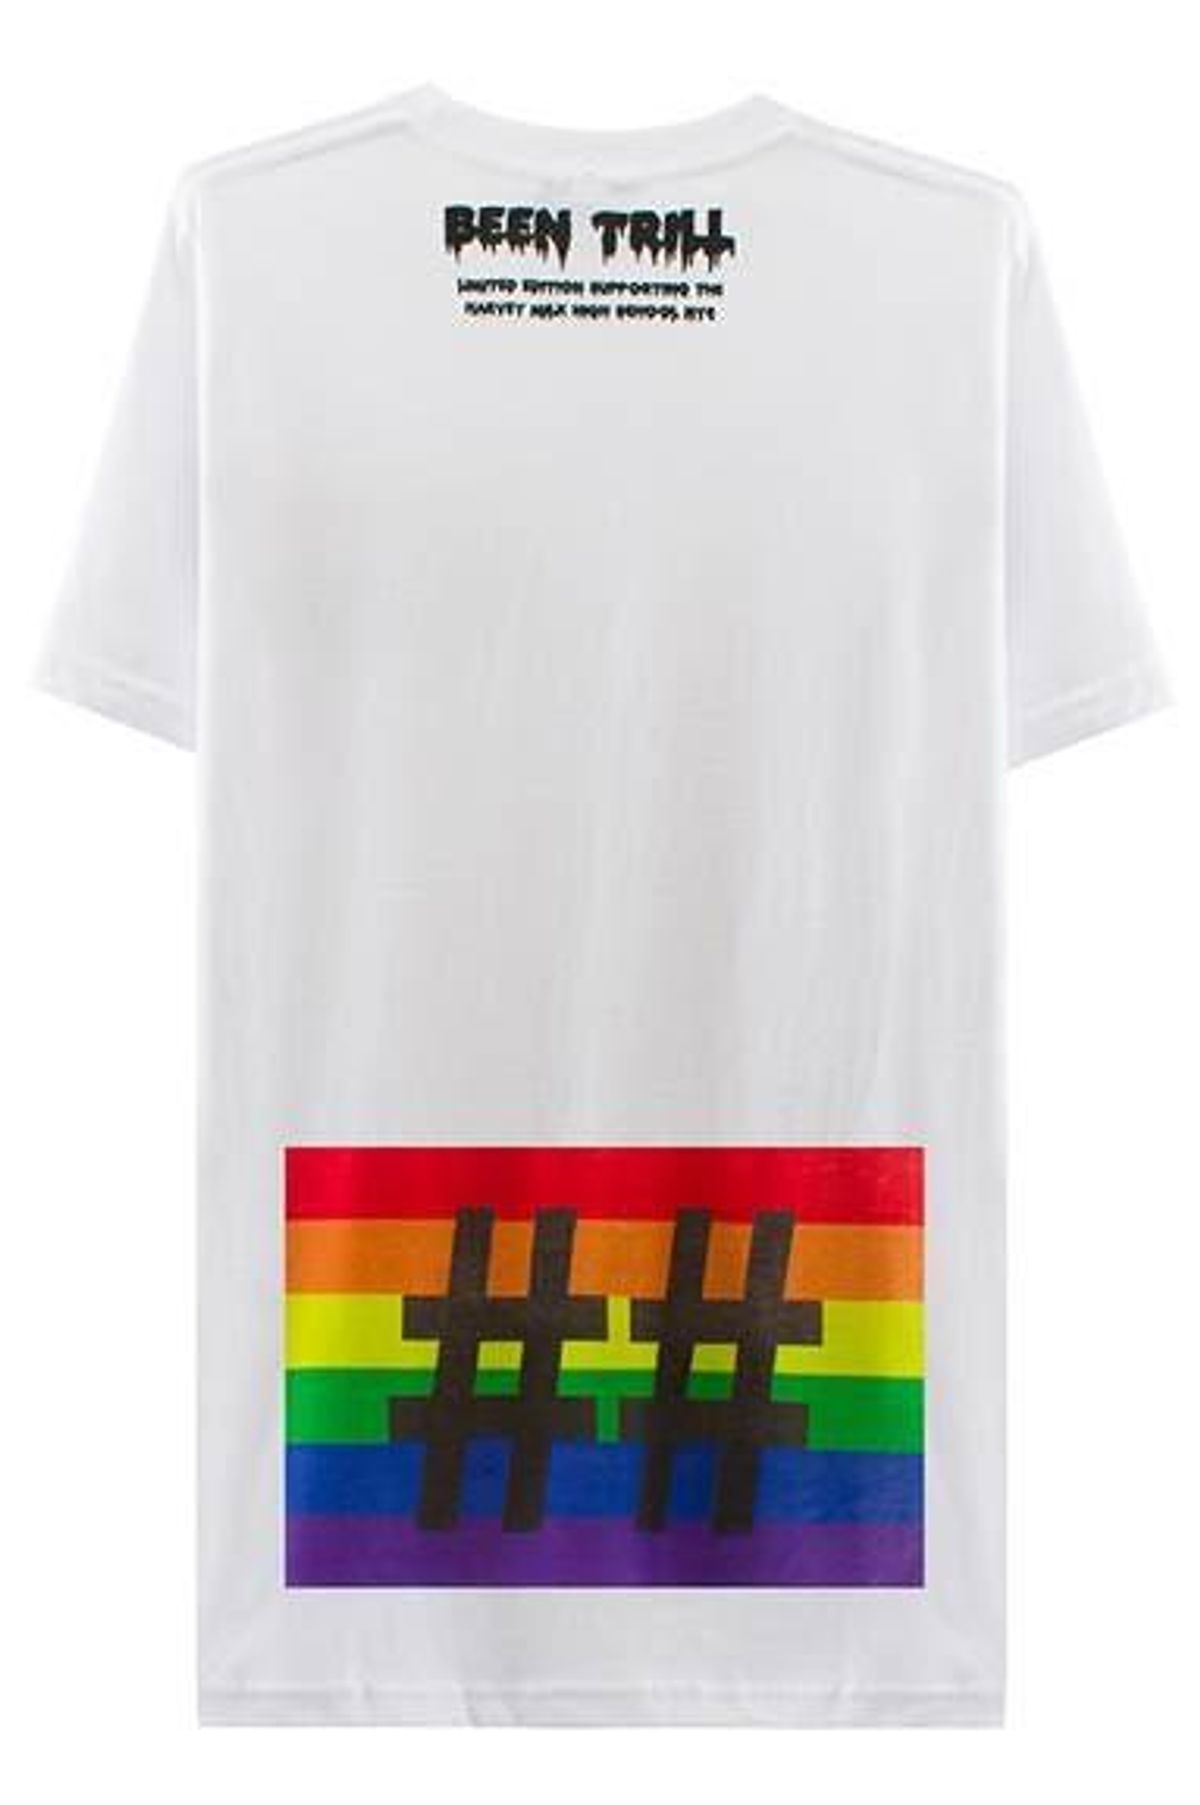 Daily crush been trill nyc pride